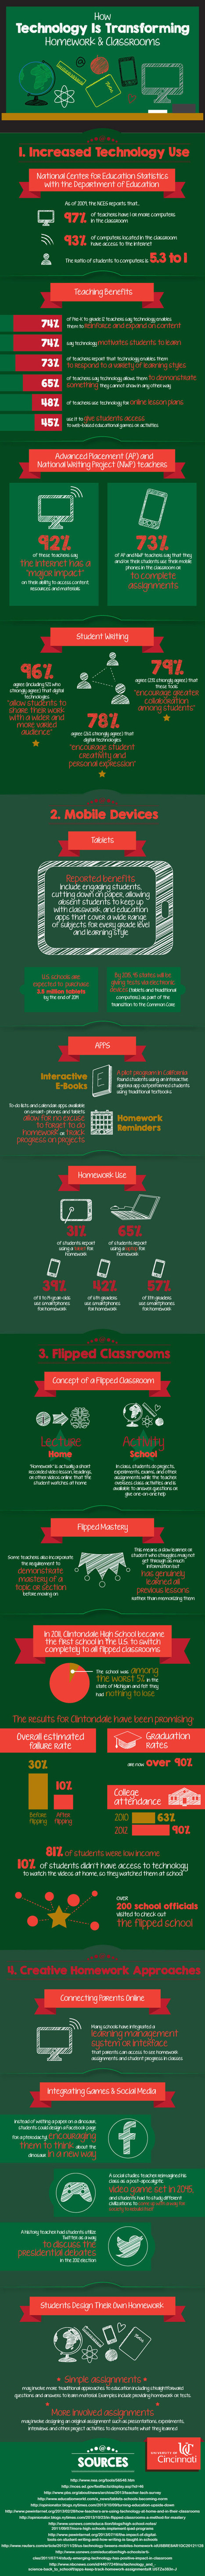 Trends | How Technology is Changing the Classroom | Moodle and Web 2.0 | Scoop.it